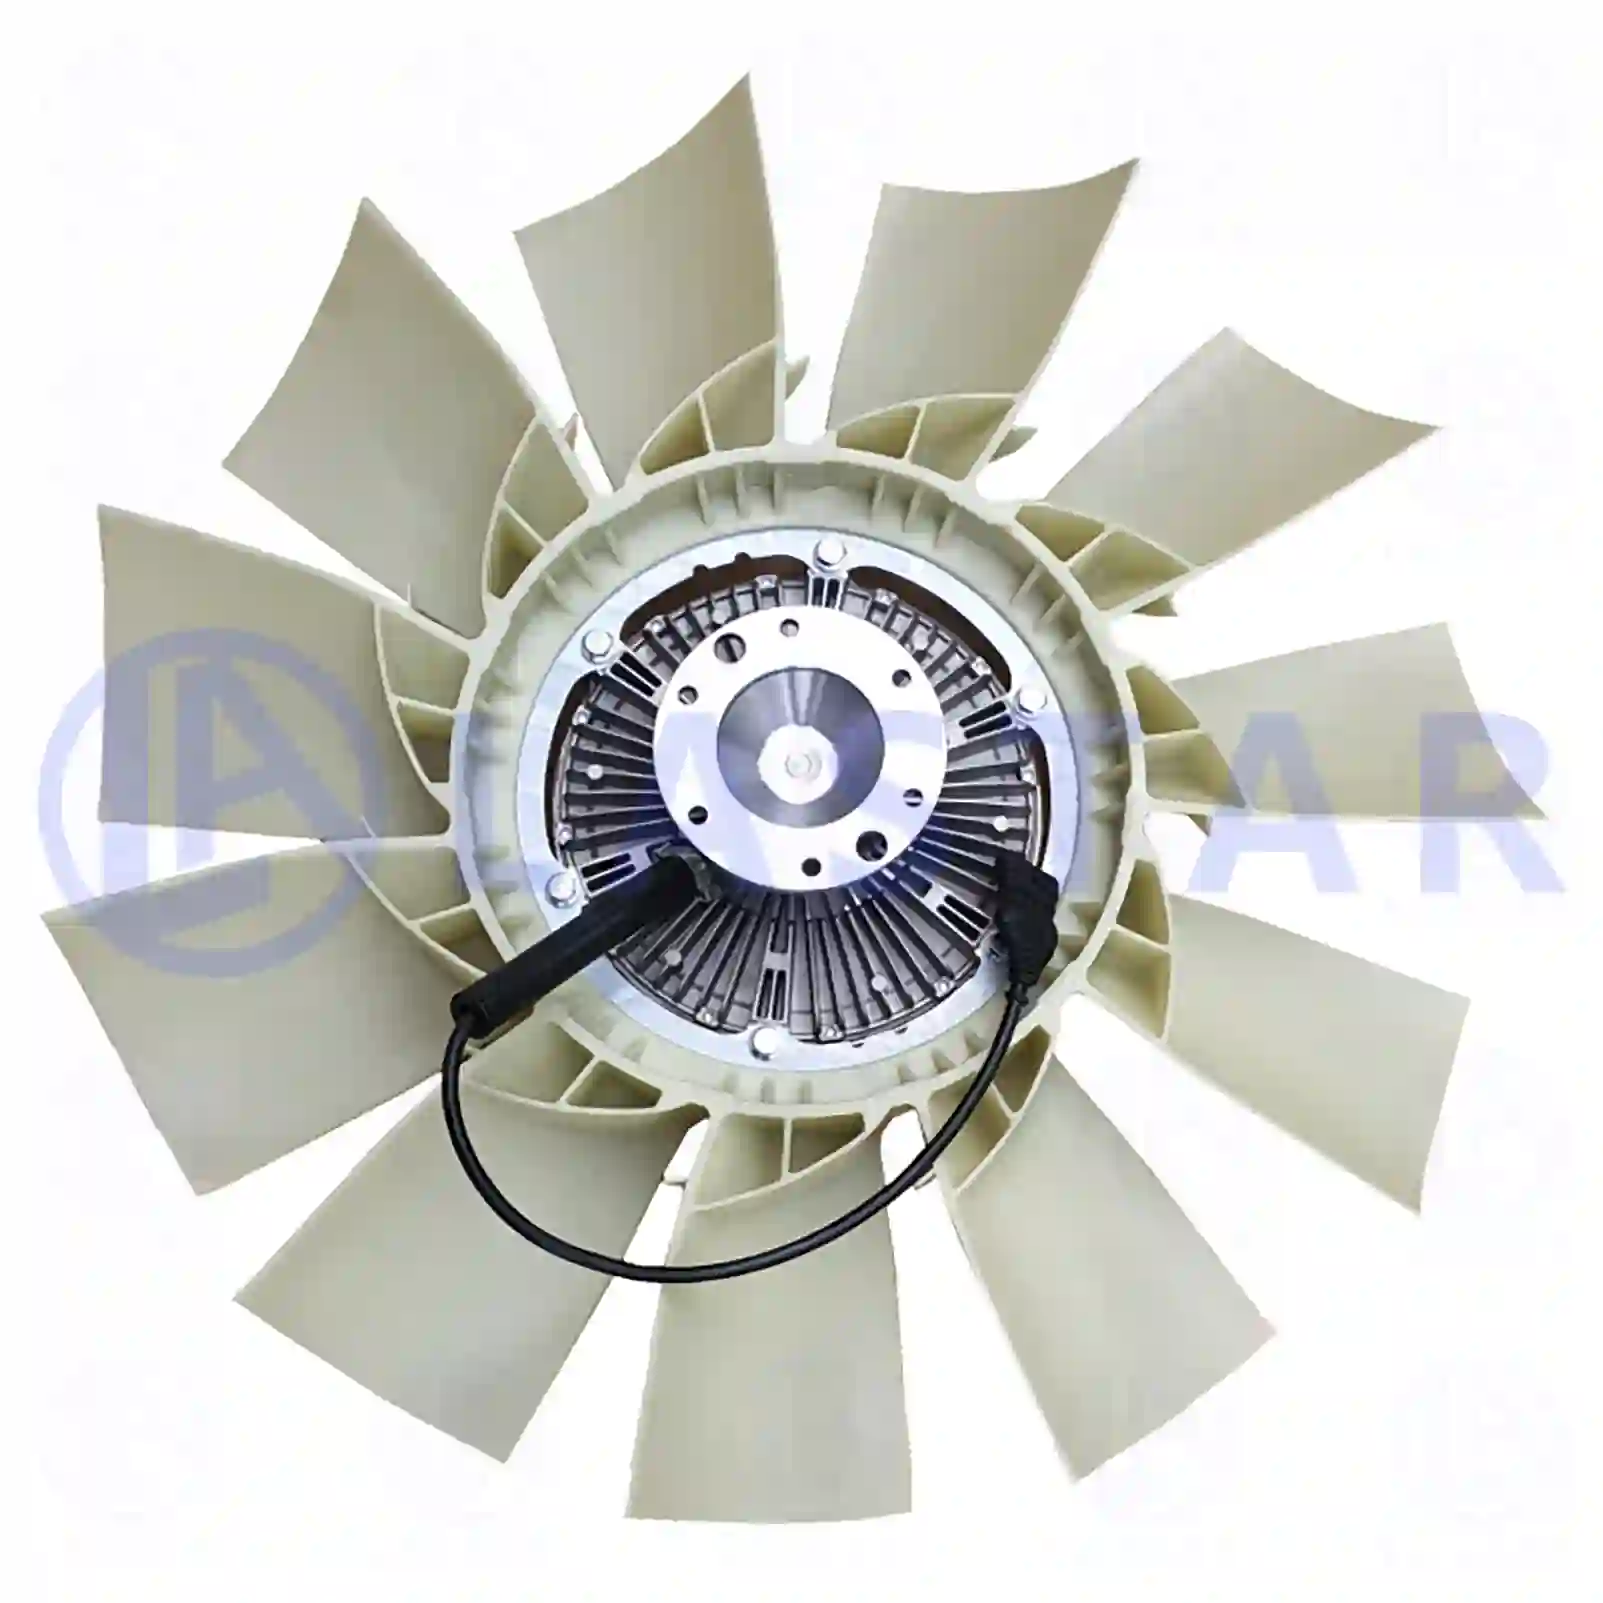 Fan with clutch, 77709734, 1776552, 2035612, ZG00393-0008 ||  77709734 Lastar Spare Part | Truck Spare Parts, Auotomotive Spare Parts Fan with clutch, 77709734, 1776552, 2035612, ZG00393-0008 ||  77709734 Lastar Spare Part | Truck Spare Parts, Auotomotive Spare Parts